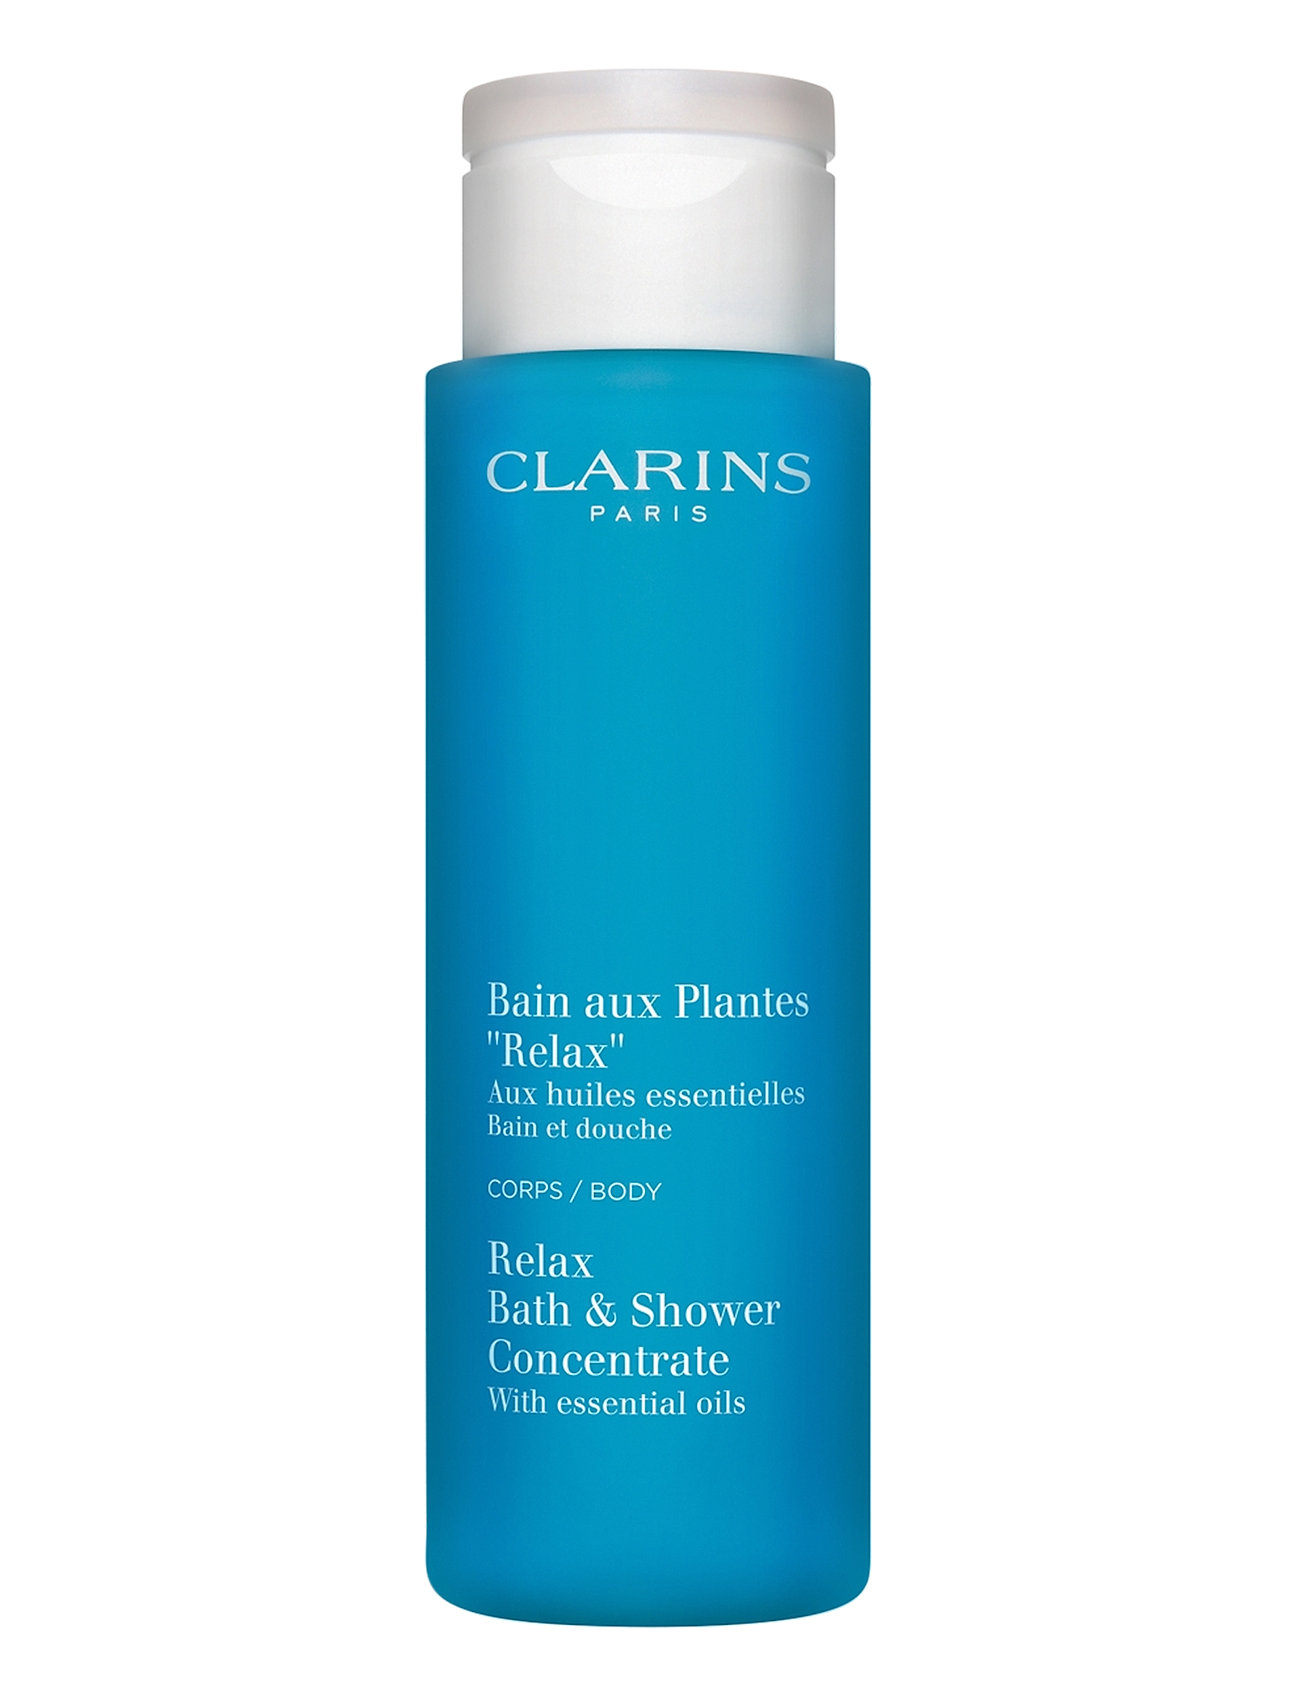 Relax Bath & Shower Concentrate Beauty WOMEN Skin Care Body Shower Gel Nude Clarins